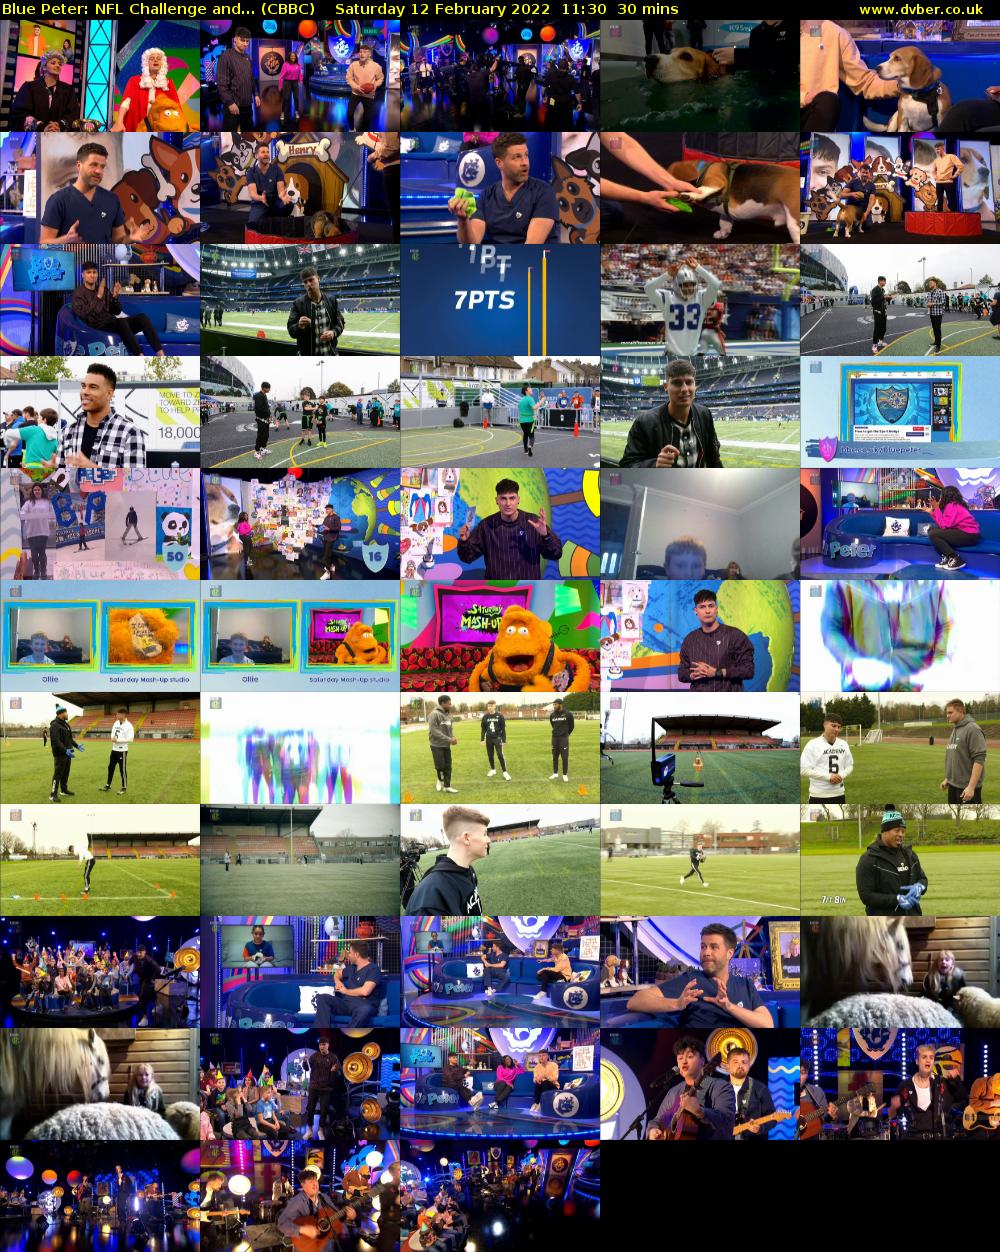 Blue Peter: NFL Challenge and... (CBBC) Saturday 12 February 2022 11:30 - 12:00